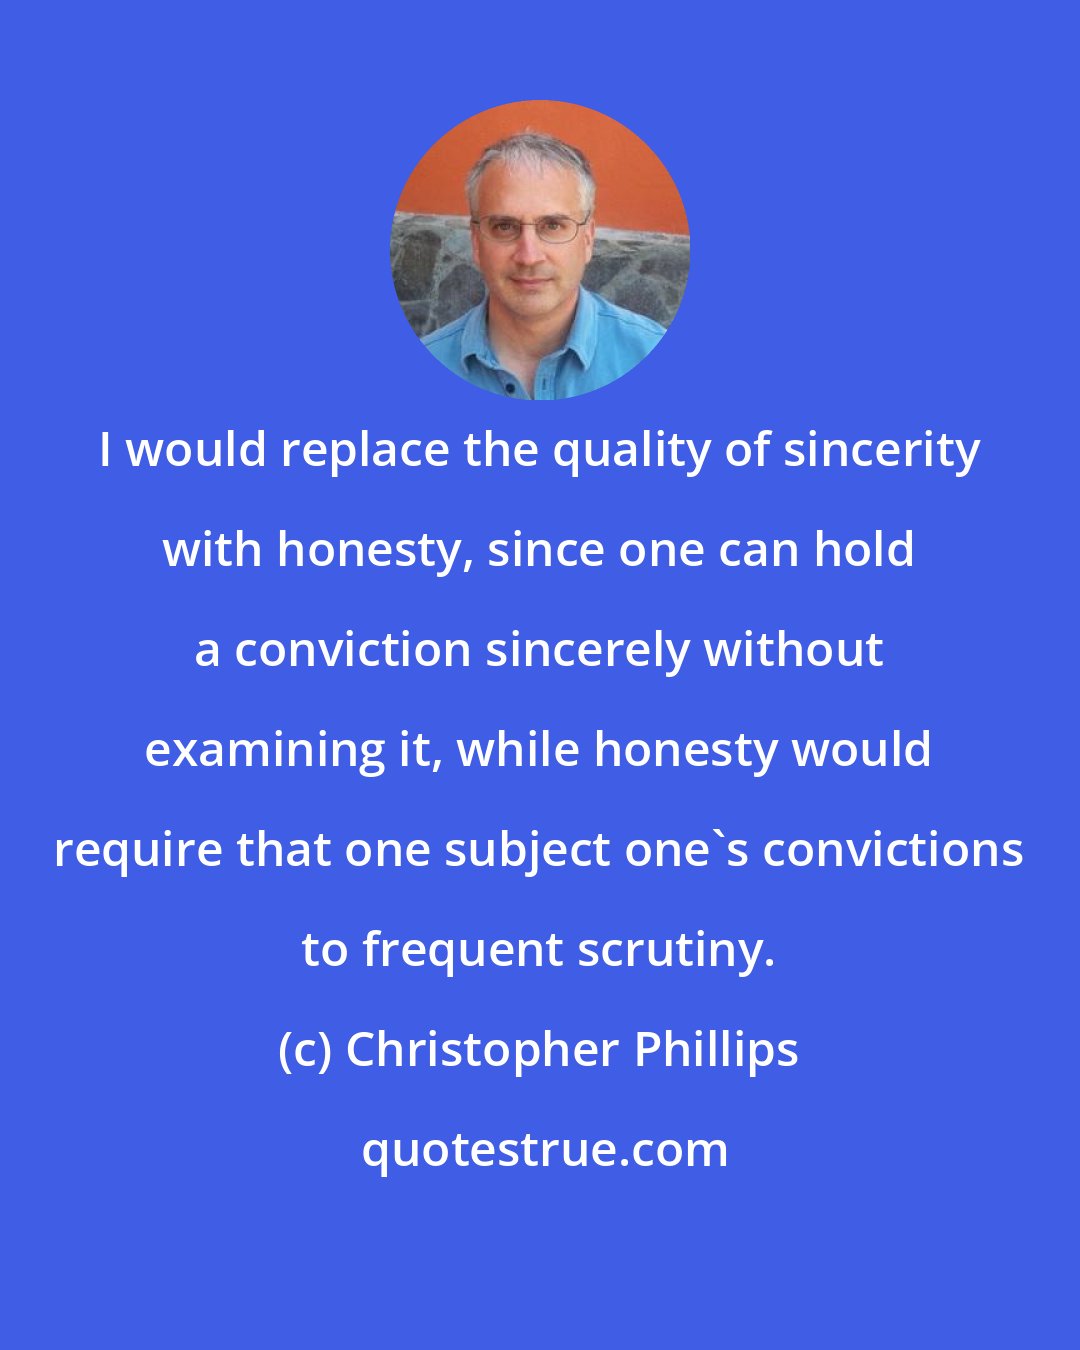 Christopher Phillips: I would replace the quality of sincerity with honesty, since one can hold a conviction sincerely without examining it, while honesty would require that one subject one's convictions to frequent scrutiny.